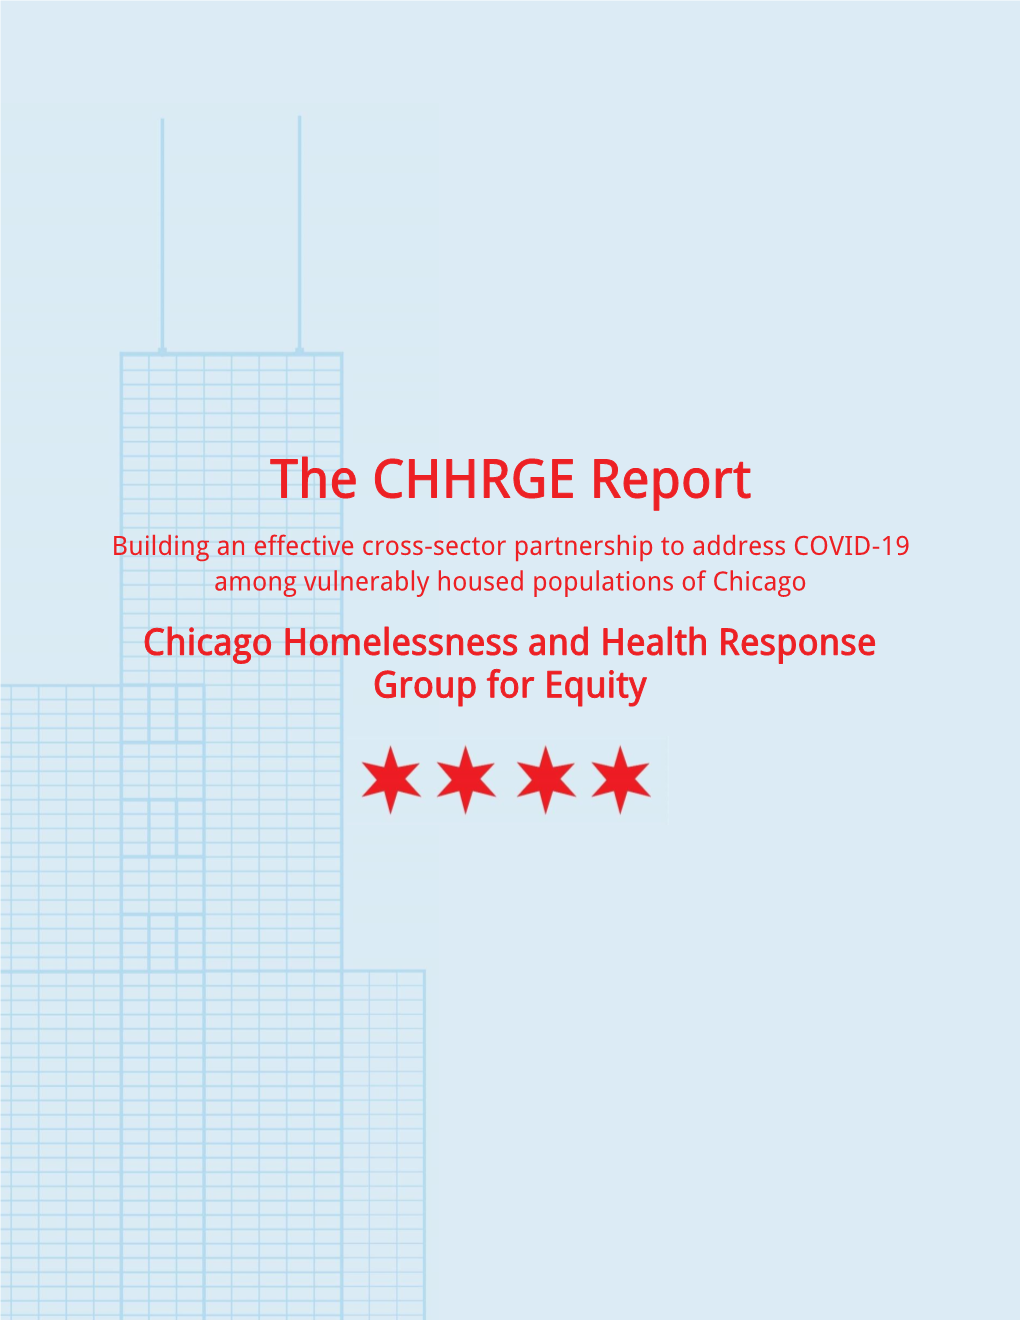 The CHHRGE Report Building an Effective Cross-Sector Partnership to Address COVID-19 Among Vulnerably Housed Populations of Chicago